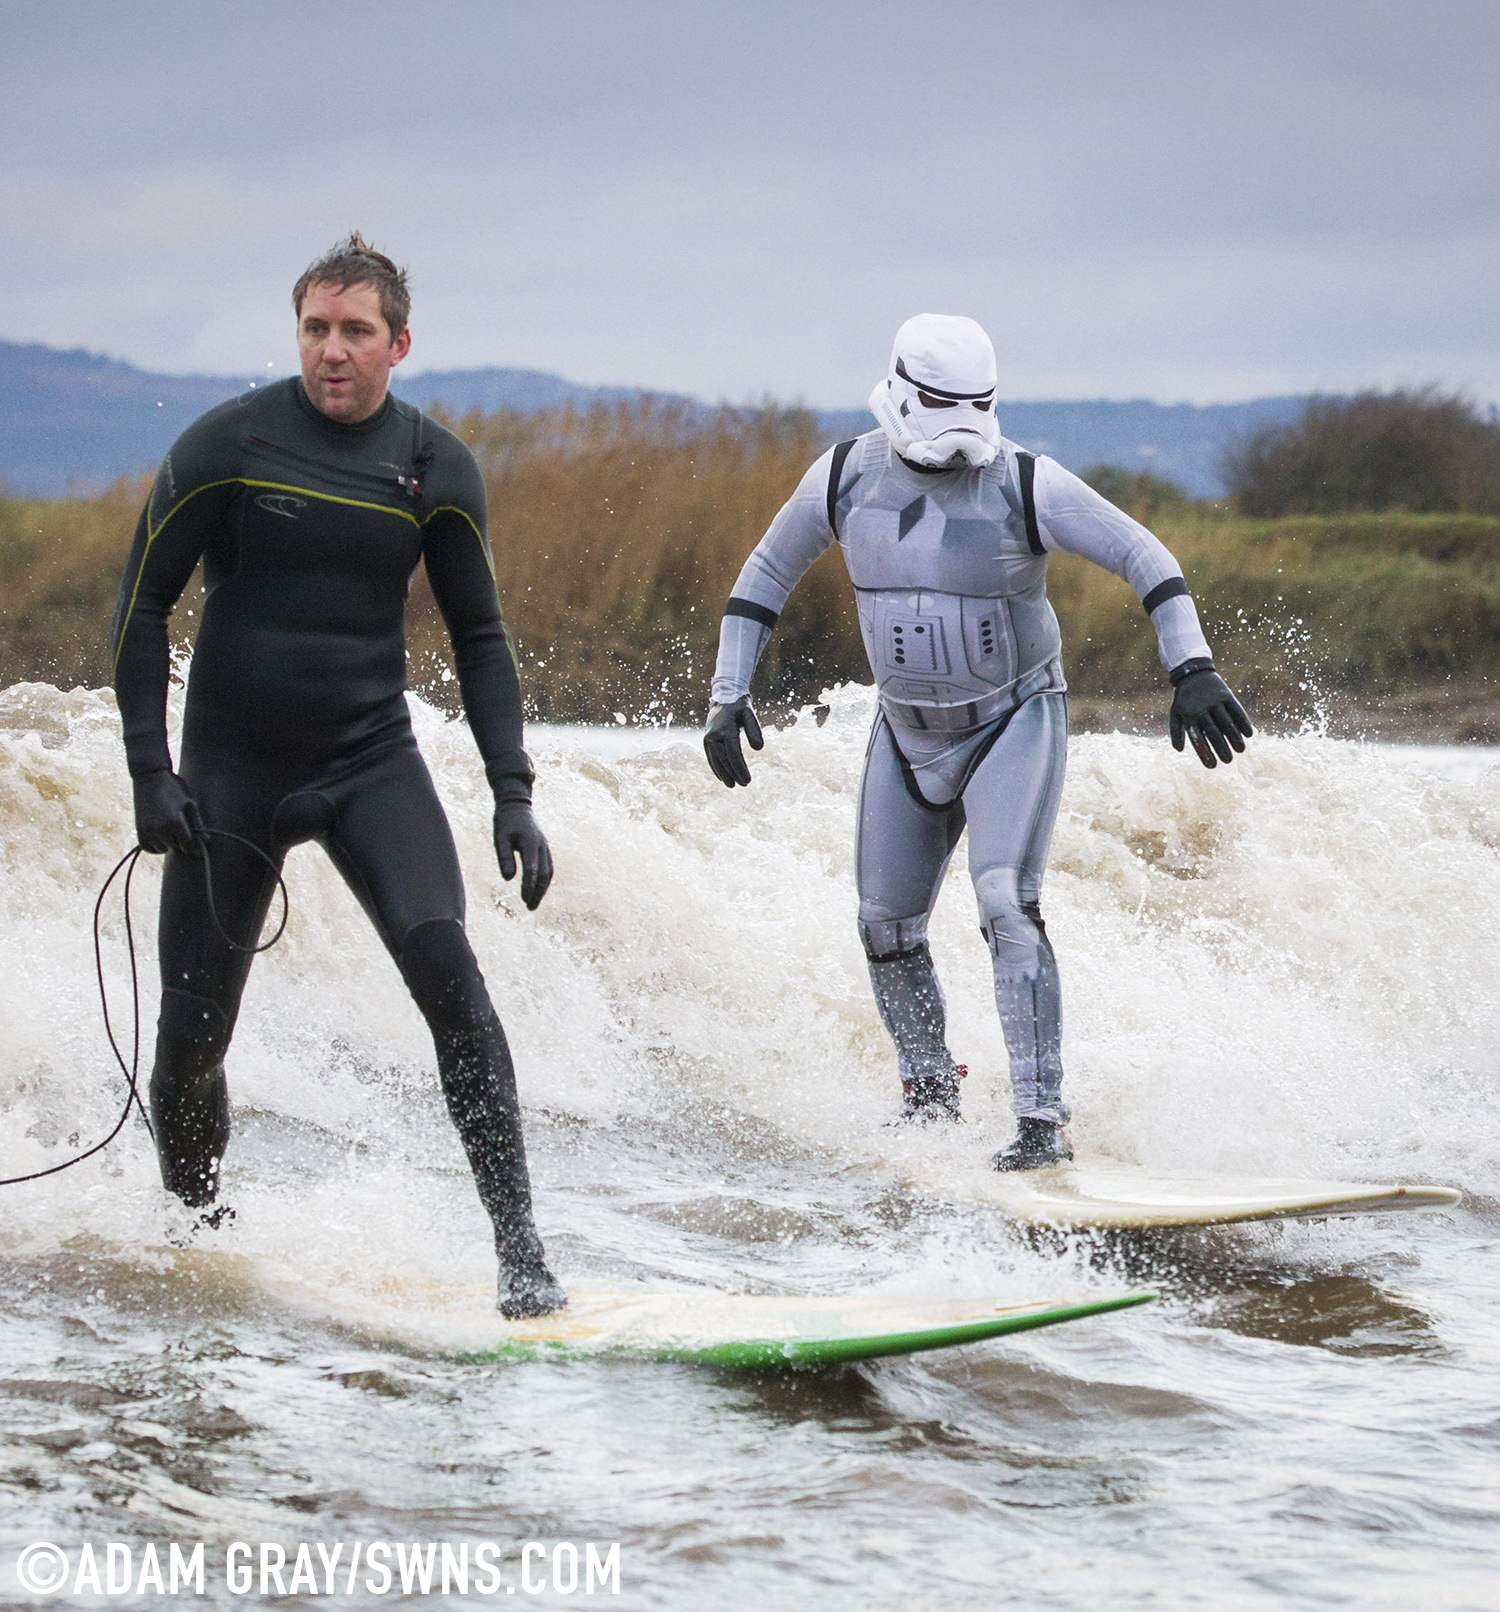 A surfer dressed as a Star Wars Stormtrooper rides the Severn Bore in Gloucestershire. 27 November 2015. See SWNS story SWTROOPER: There was an unworldly sight in the Forest of Dean this morning (Friday 27th November) when a trio of Star Wars Stormtroopers surfed the spectacular Severn Bore. Key scenes from the upcoming Star Wars episode VII were filmed in nearby Puzzlewood and can be seen several times in the trailer. Swapping the Death Star for surfboards, the elite soldiers of the Galactic Empire took to the waves to mark the release of the highly anticipated new Star Wars film and a new TV & Movie Trail. The Forest of Dean’s atmospheric and picturesque location provided a natural stage for the film, which director J.J Abrams referenced in a thank you letter to all of the movie's cast and crew.